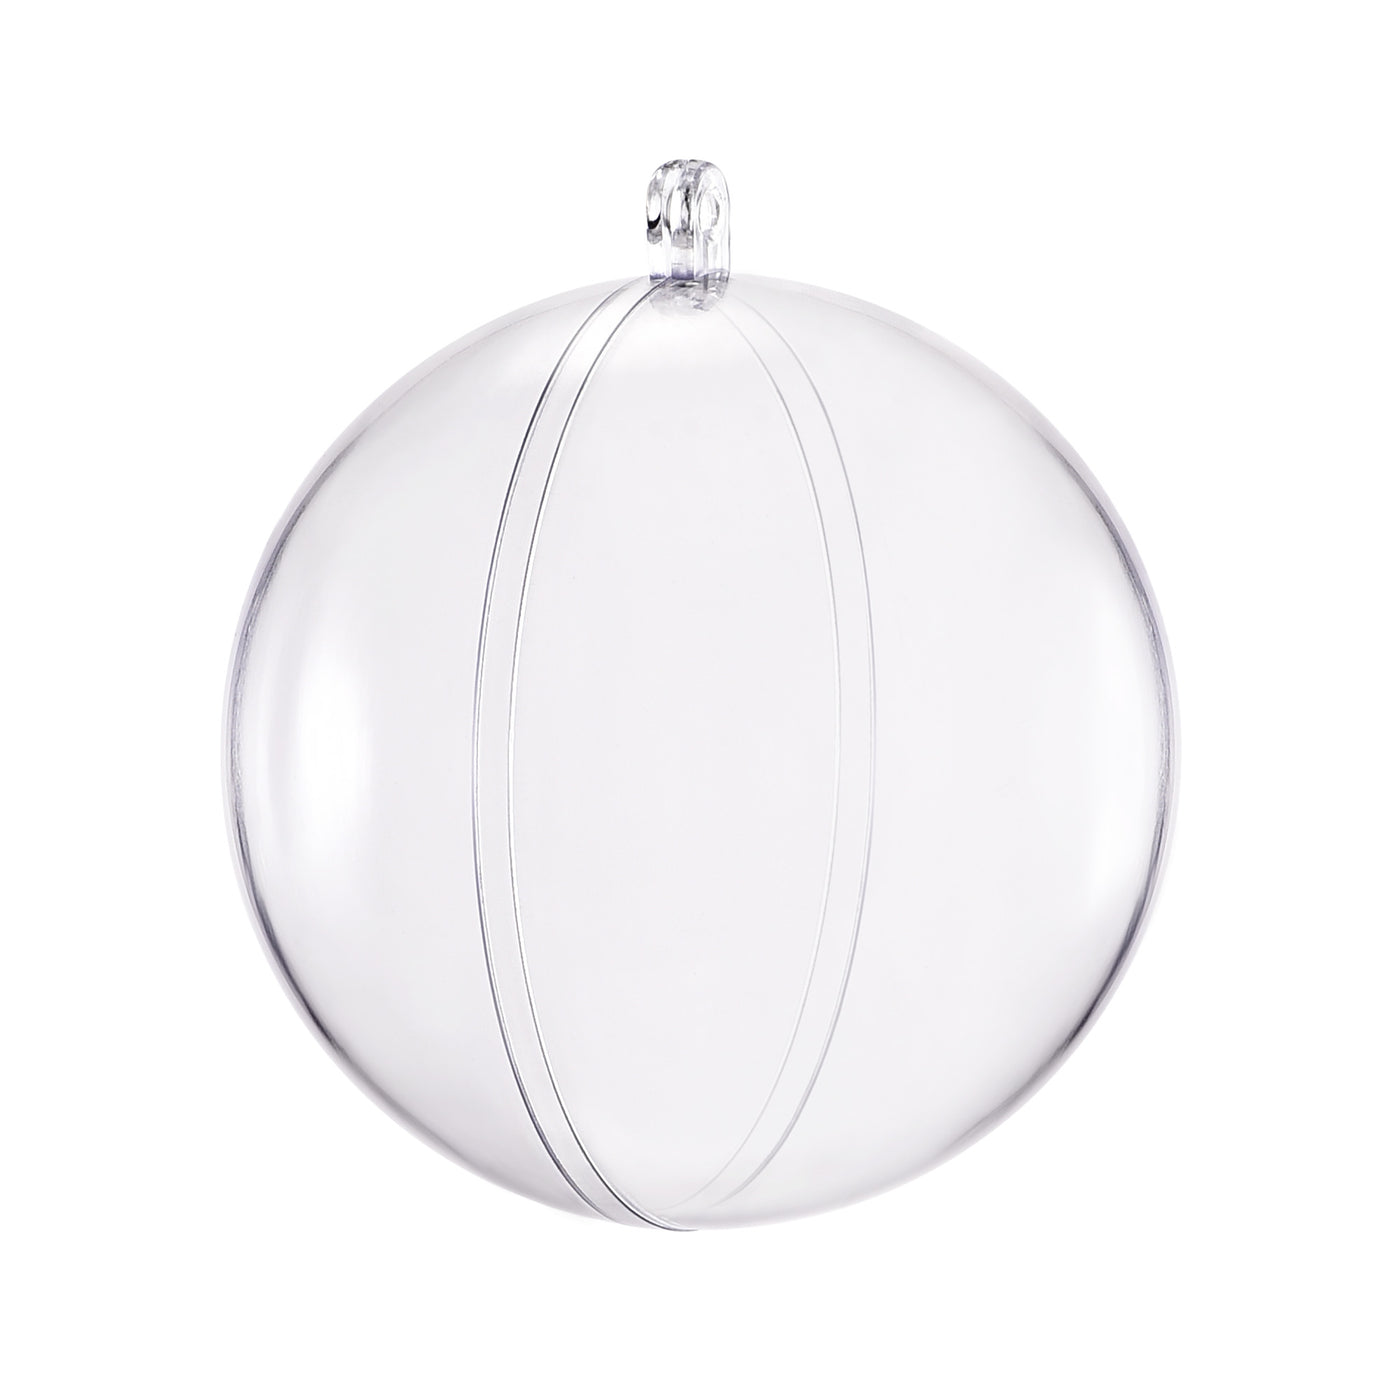 uxcell Uxcell 4pcs 5 1/2-inch(140mm) Clear Plastic Ornaments Ball